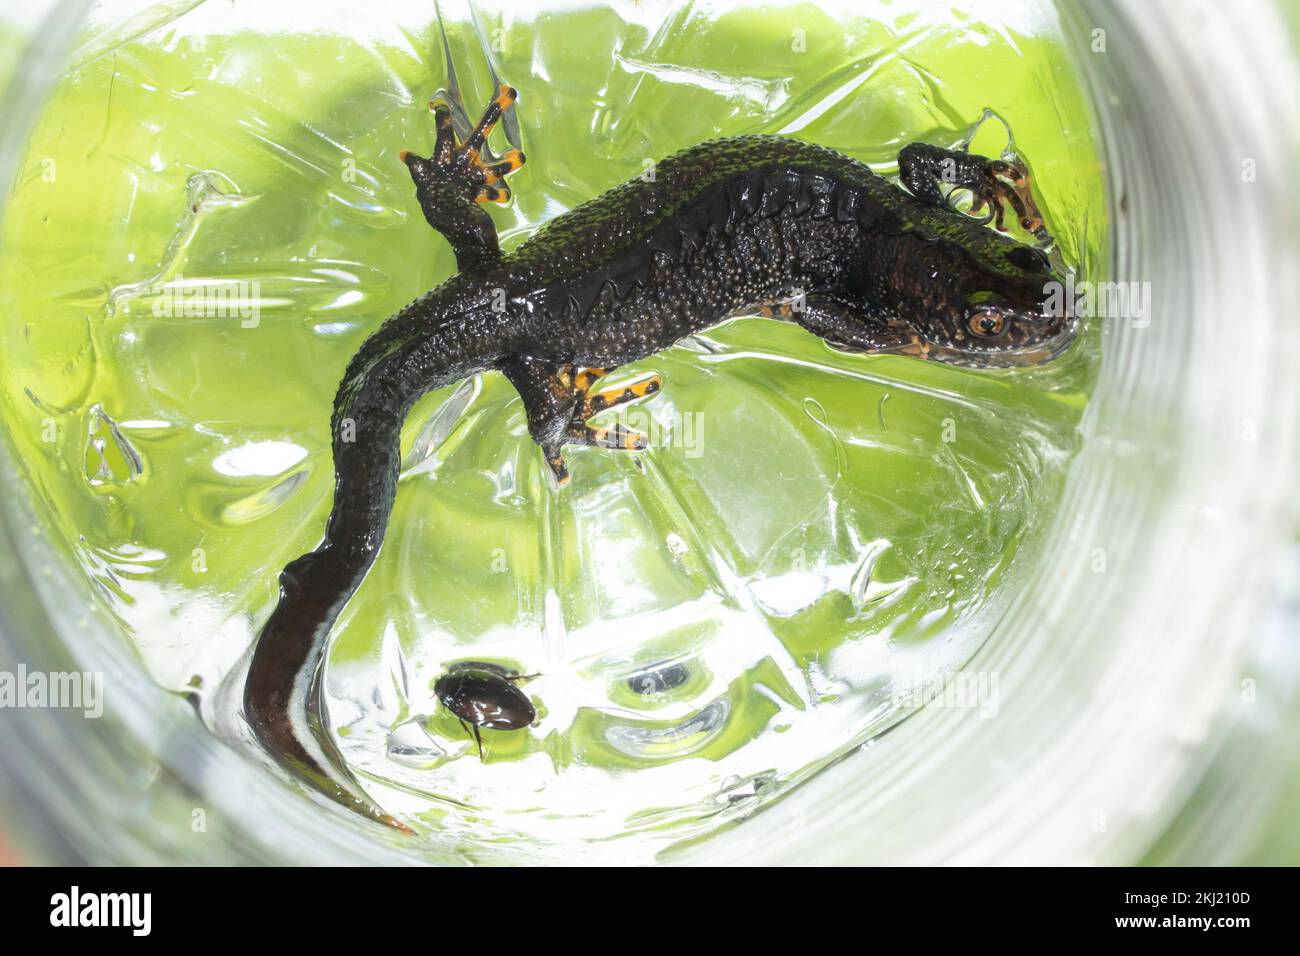 Great Crested Newt (Triturus cristatus) in bottle trap. Handled under licence. Sussex, UK. Stock Photo